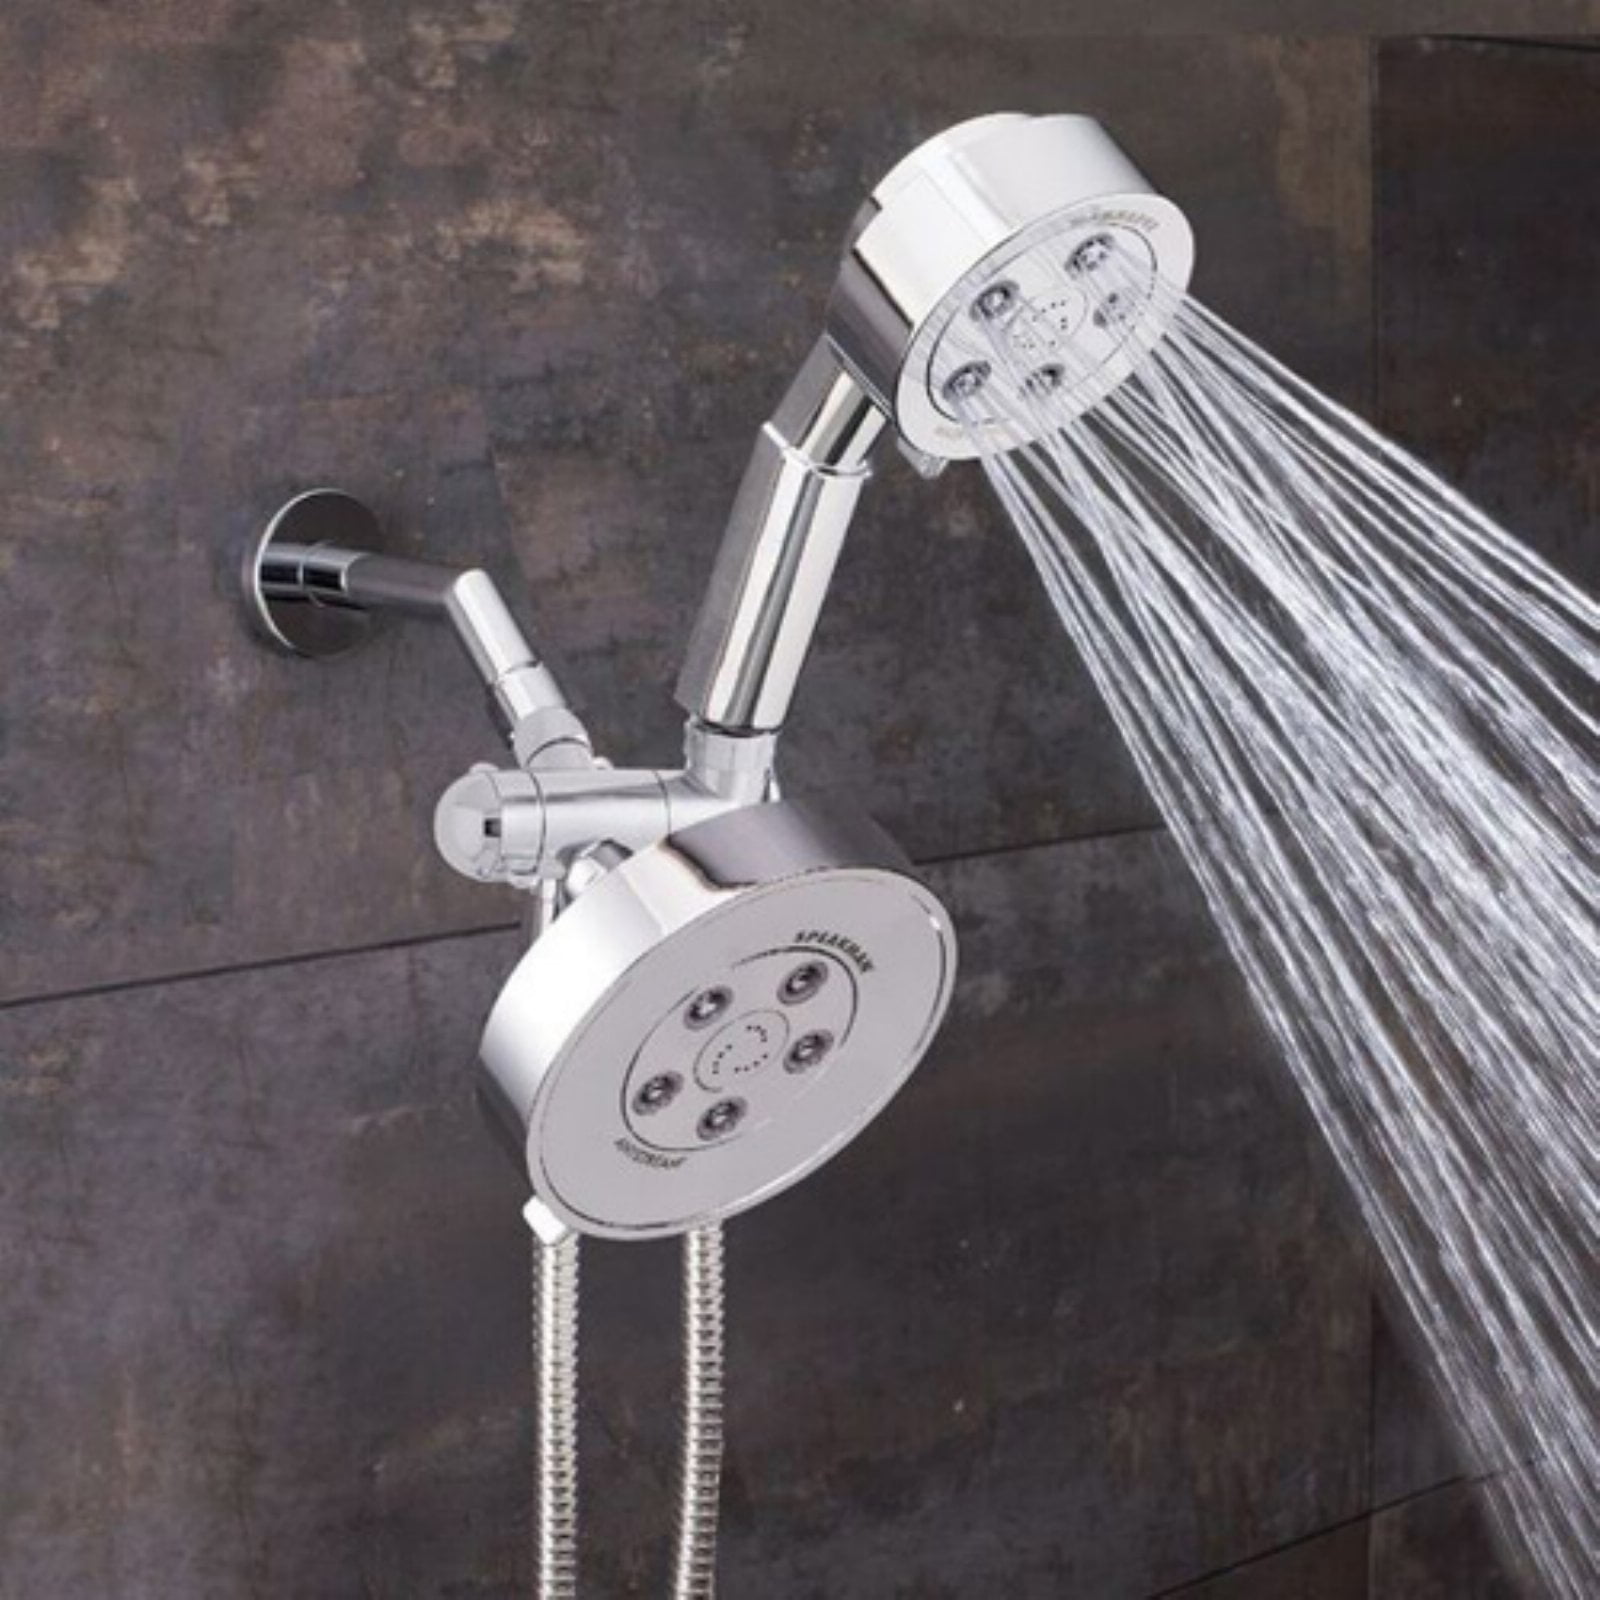 Polished Chrome Speakman VS-3010 Neo Anystream High Pressure Handheld Shower Head with Hose 2.5 GPM